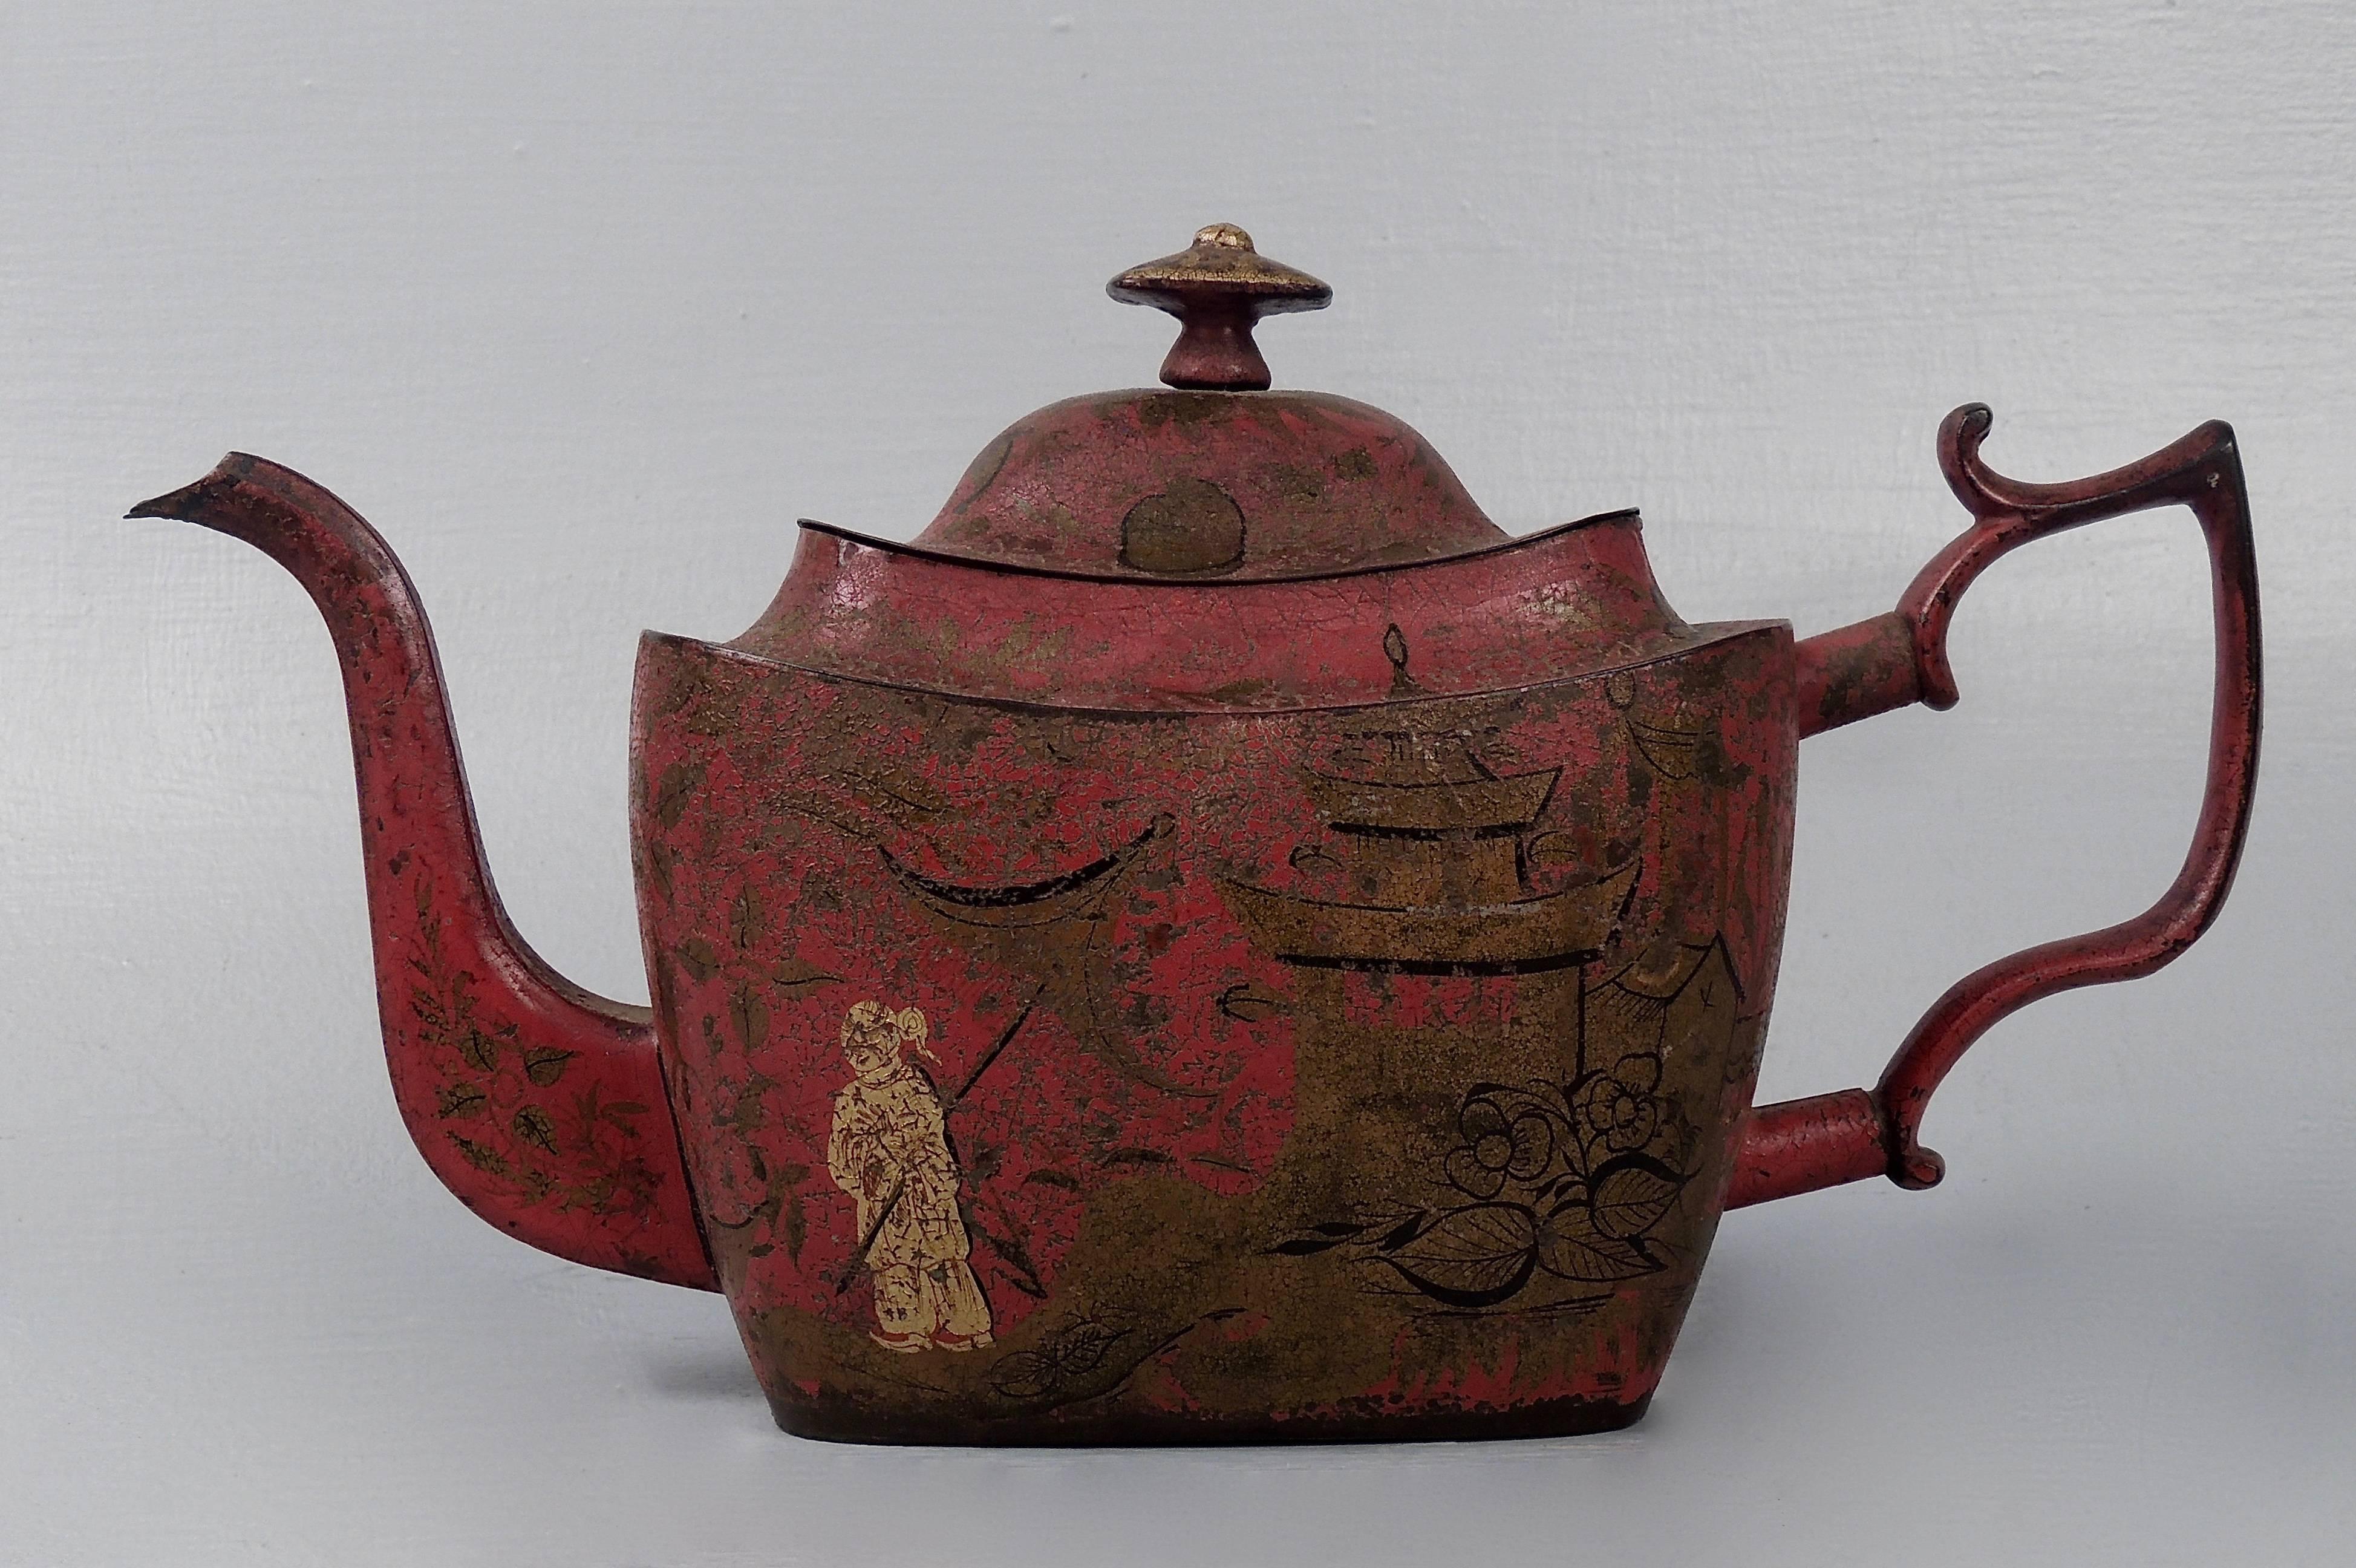 A fine georgian red tole paint or toleware teapot. This late 18th century piece is chinoiserie decorated throughout in gold and black on a red ground. A very rare form.

Height: circa 6.5 in. 
Length: circa 11 in. (handle to spout) 

Items purchased